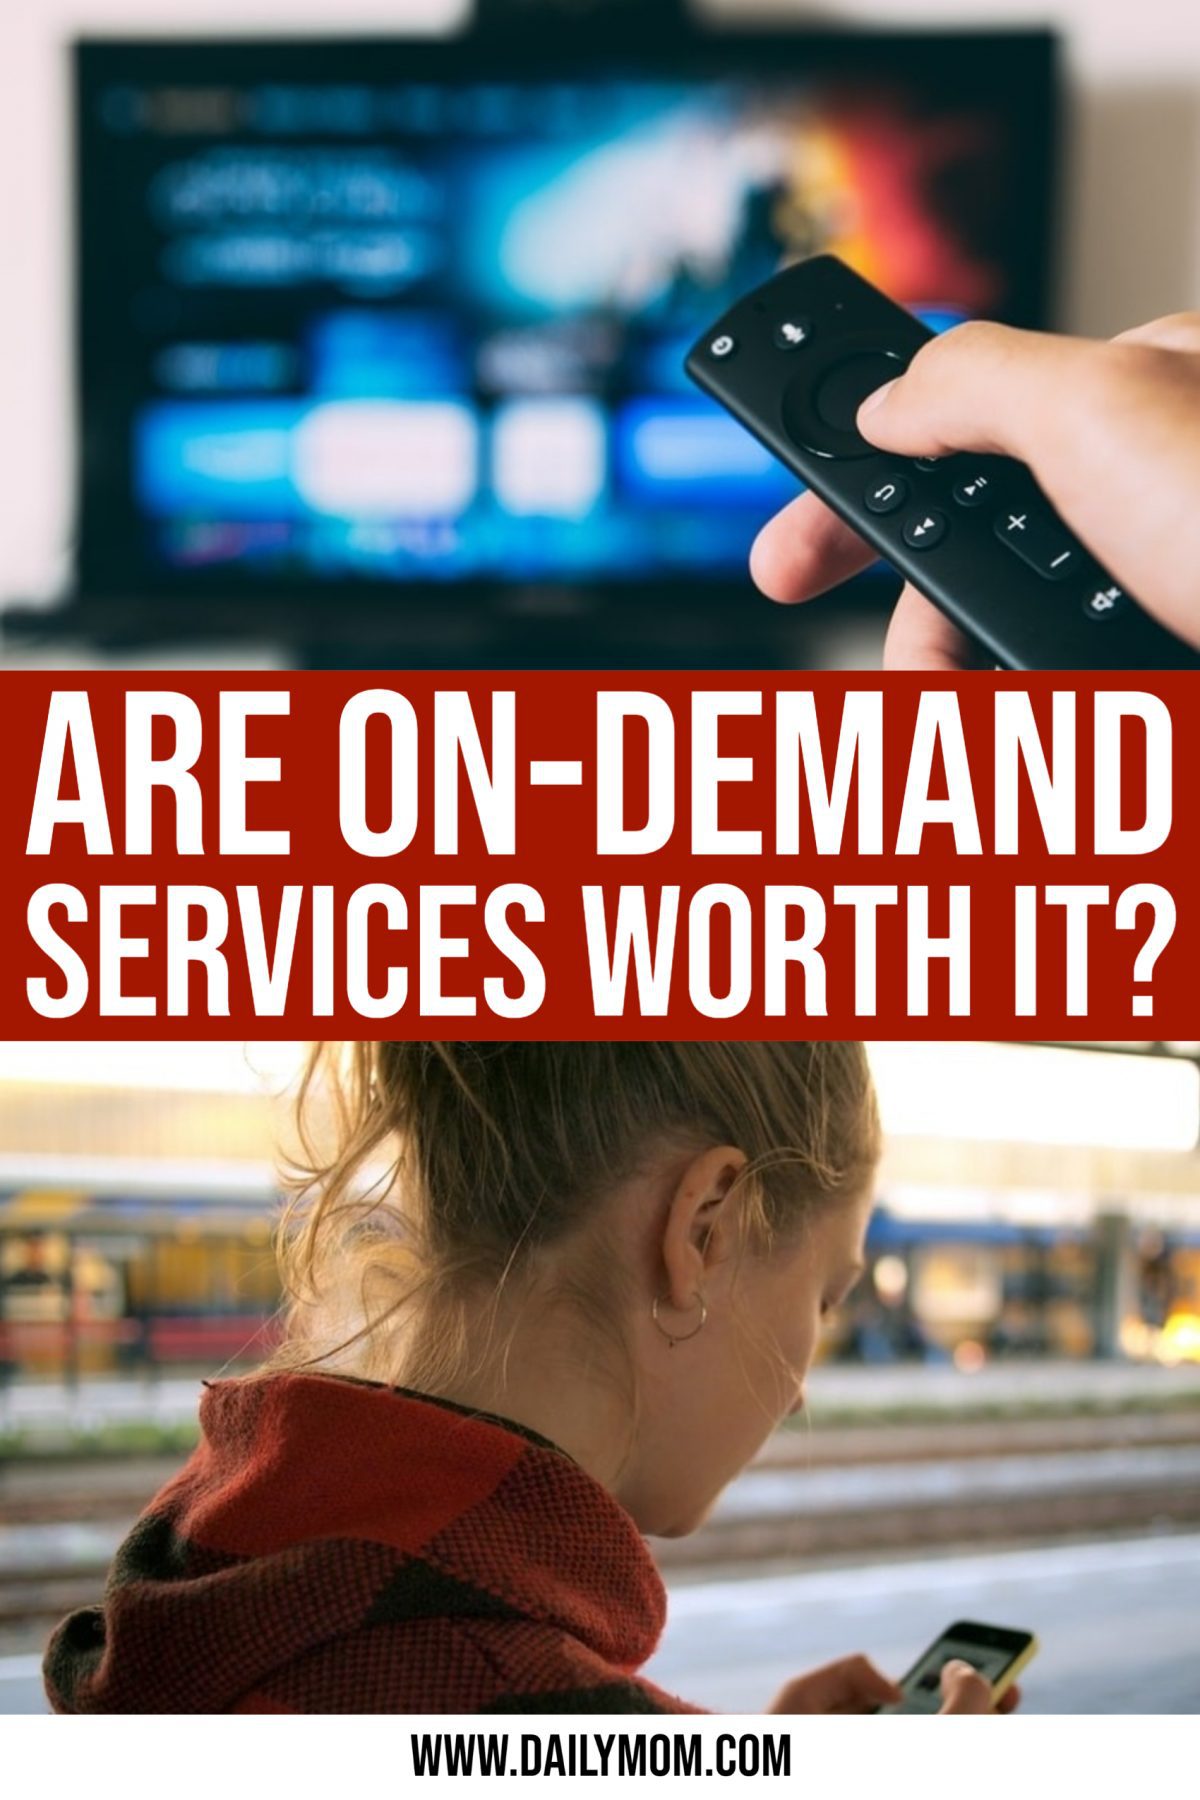 They Seem Convenient But Are On-Demand Services Worth It?